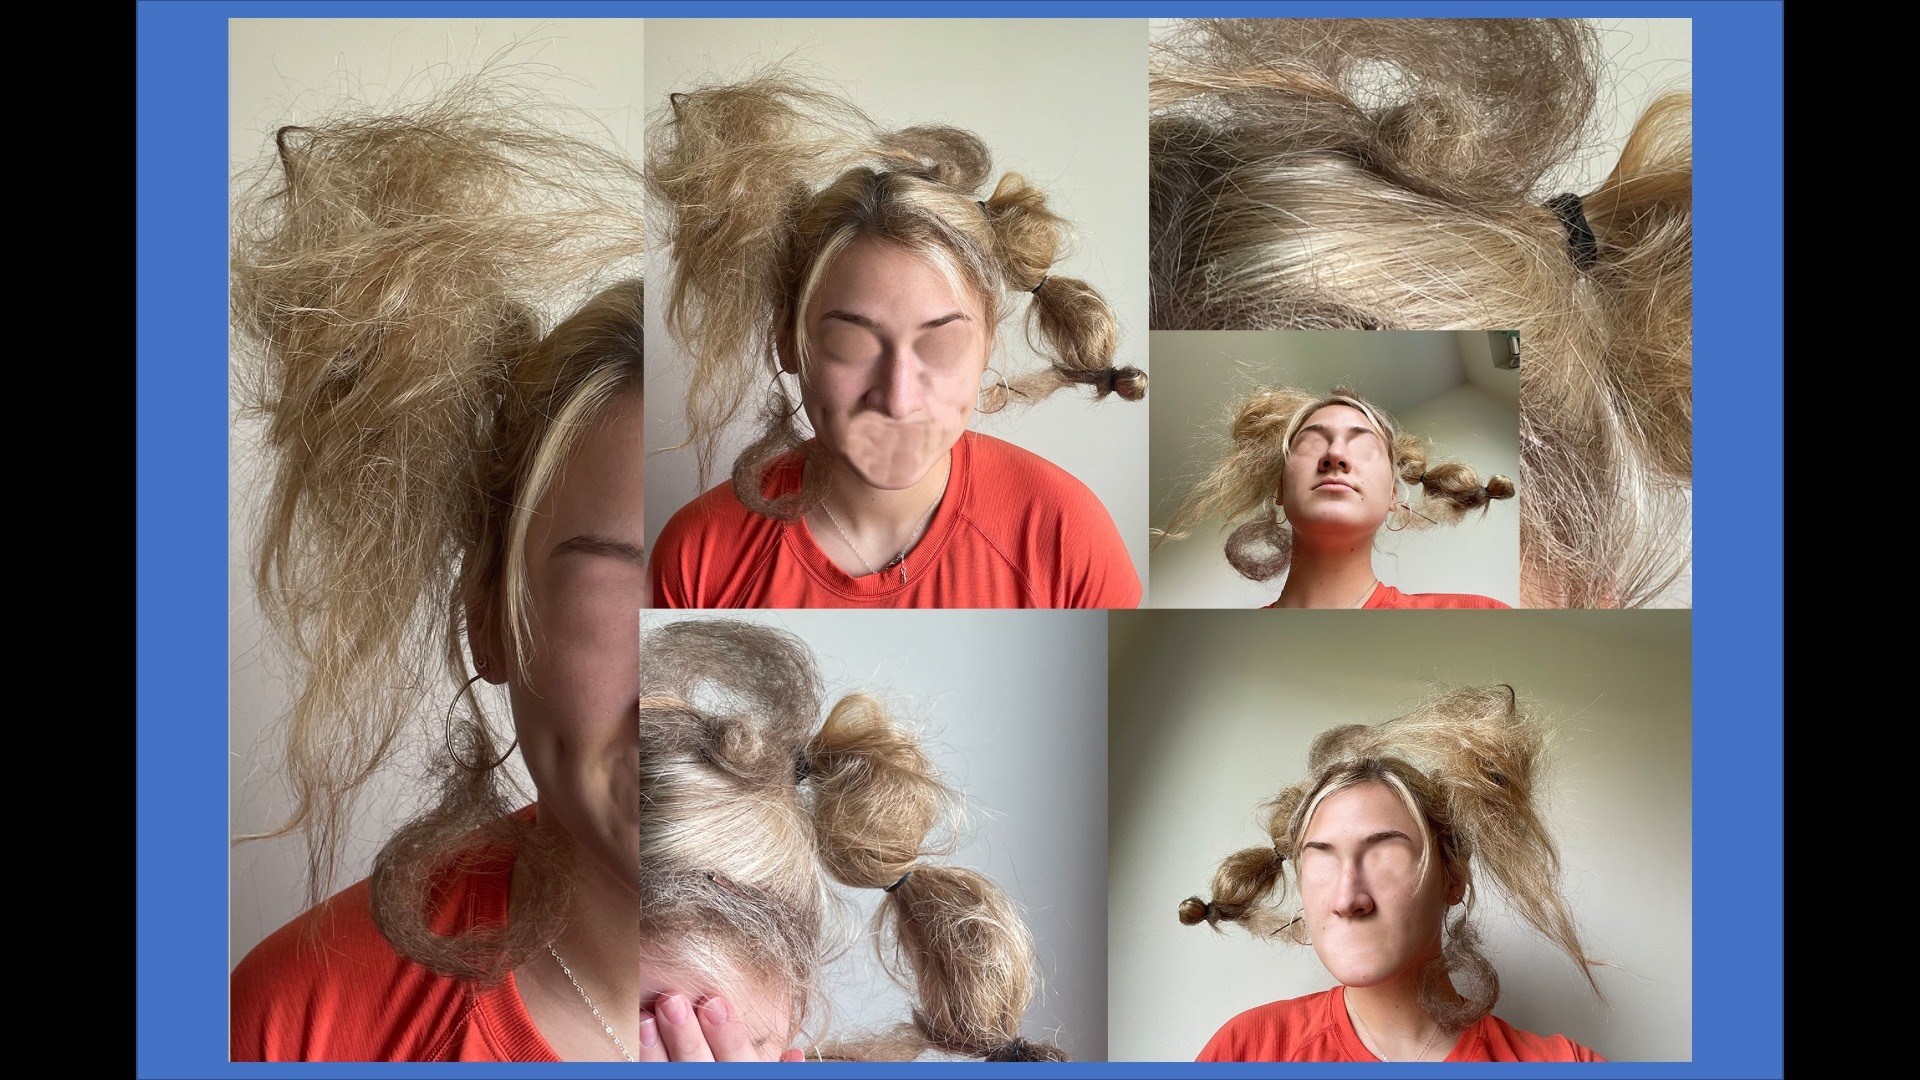 grid photos of person’s head with tangled and knotted hair extending outward